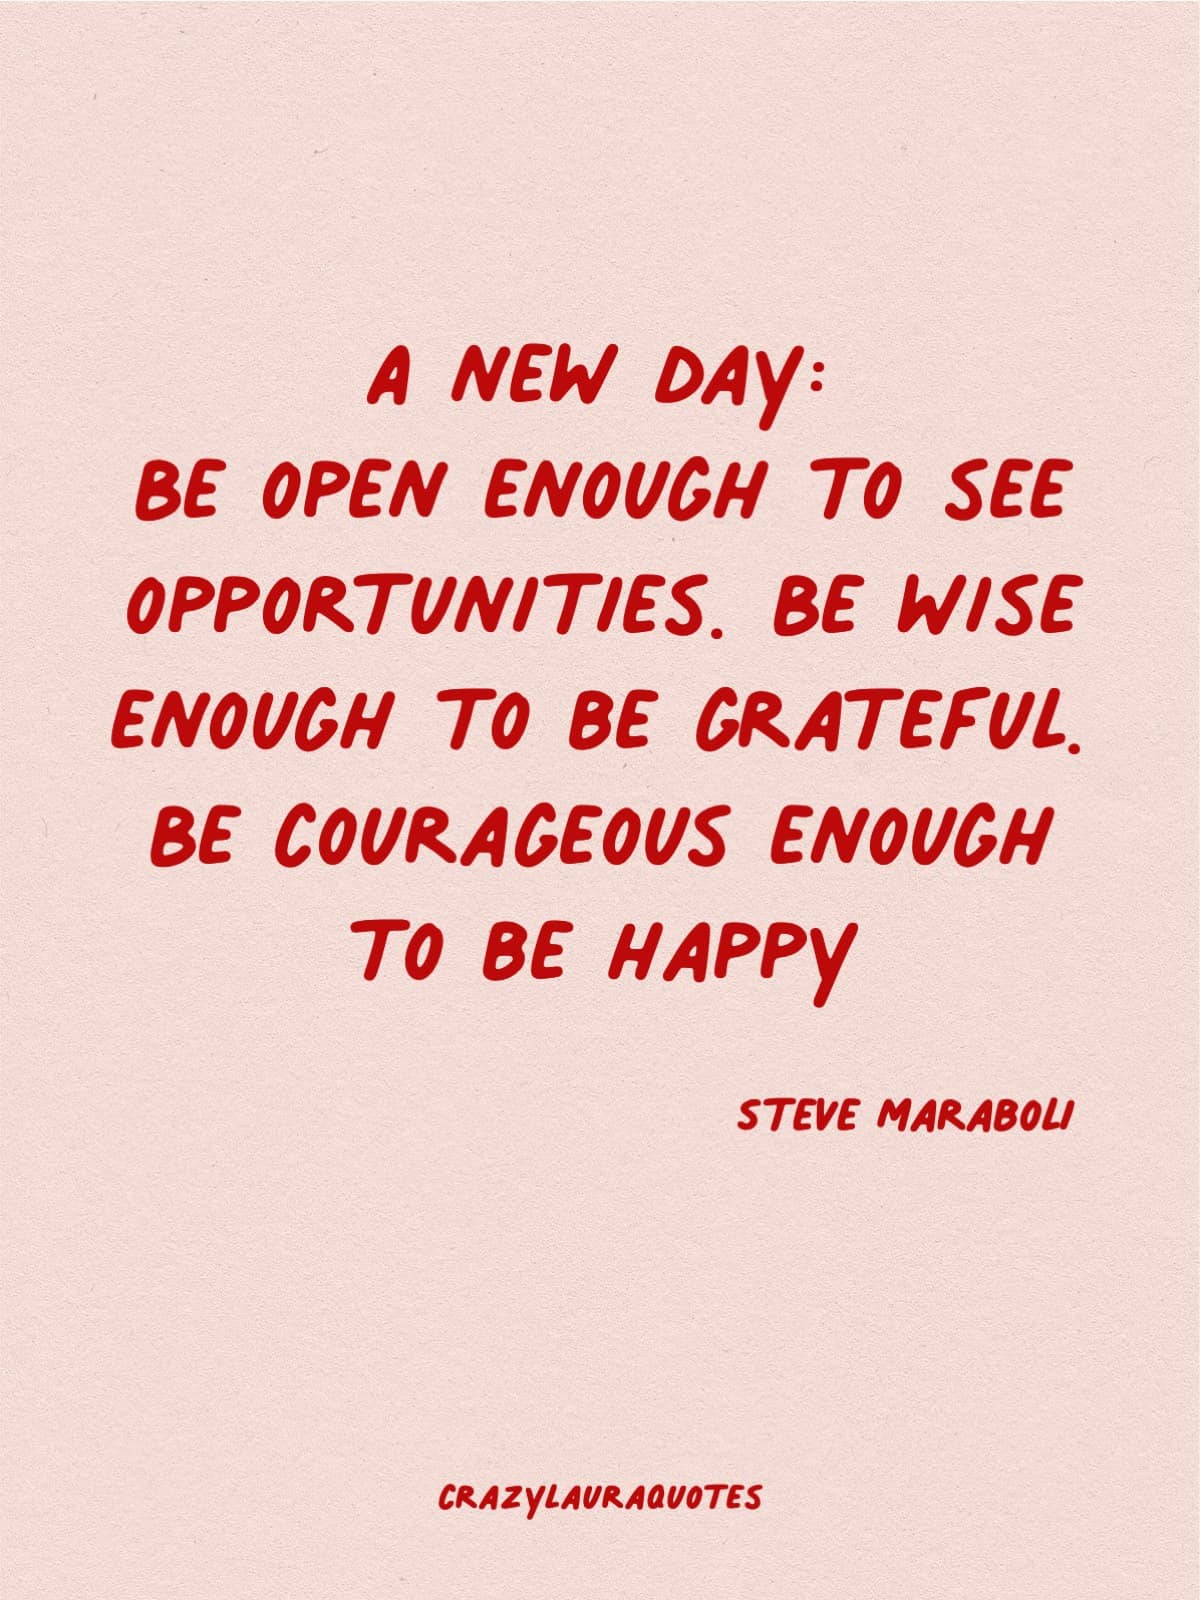 today is a new day steve maraboli quote